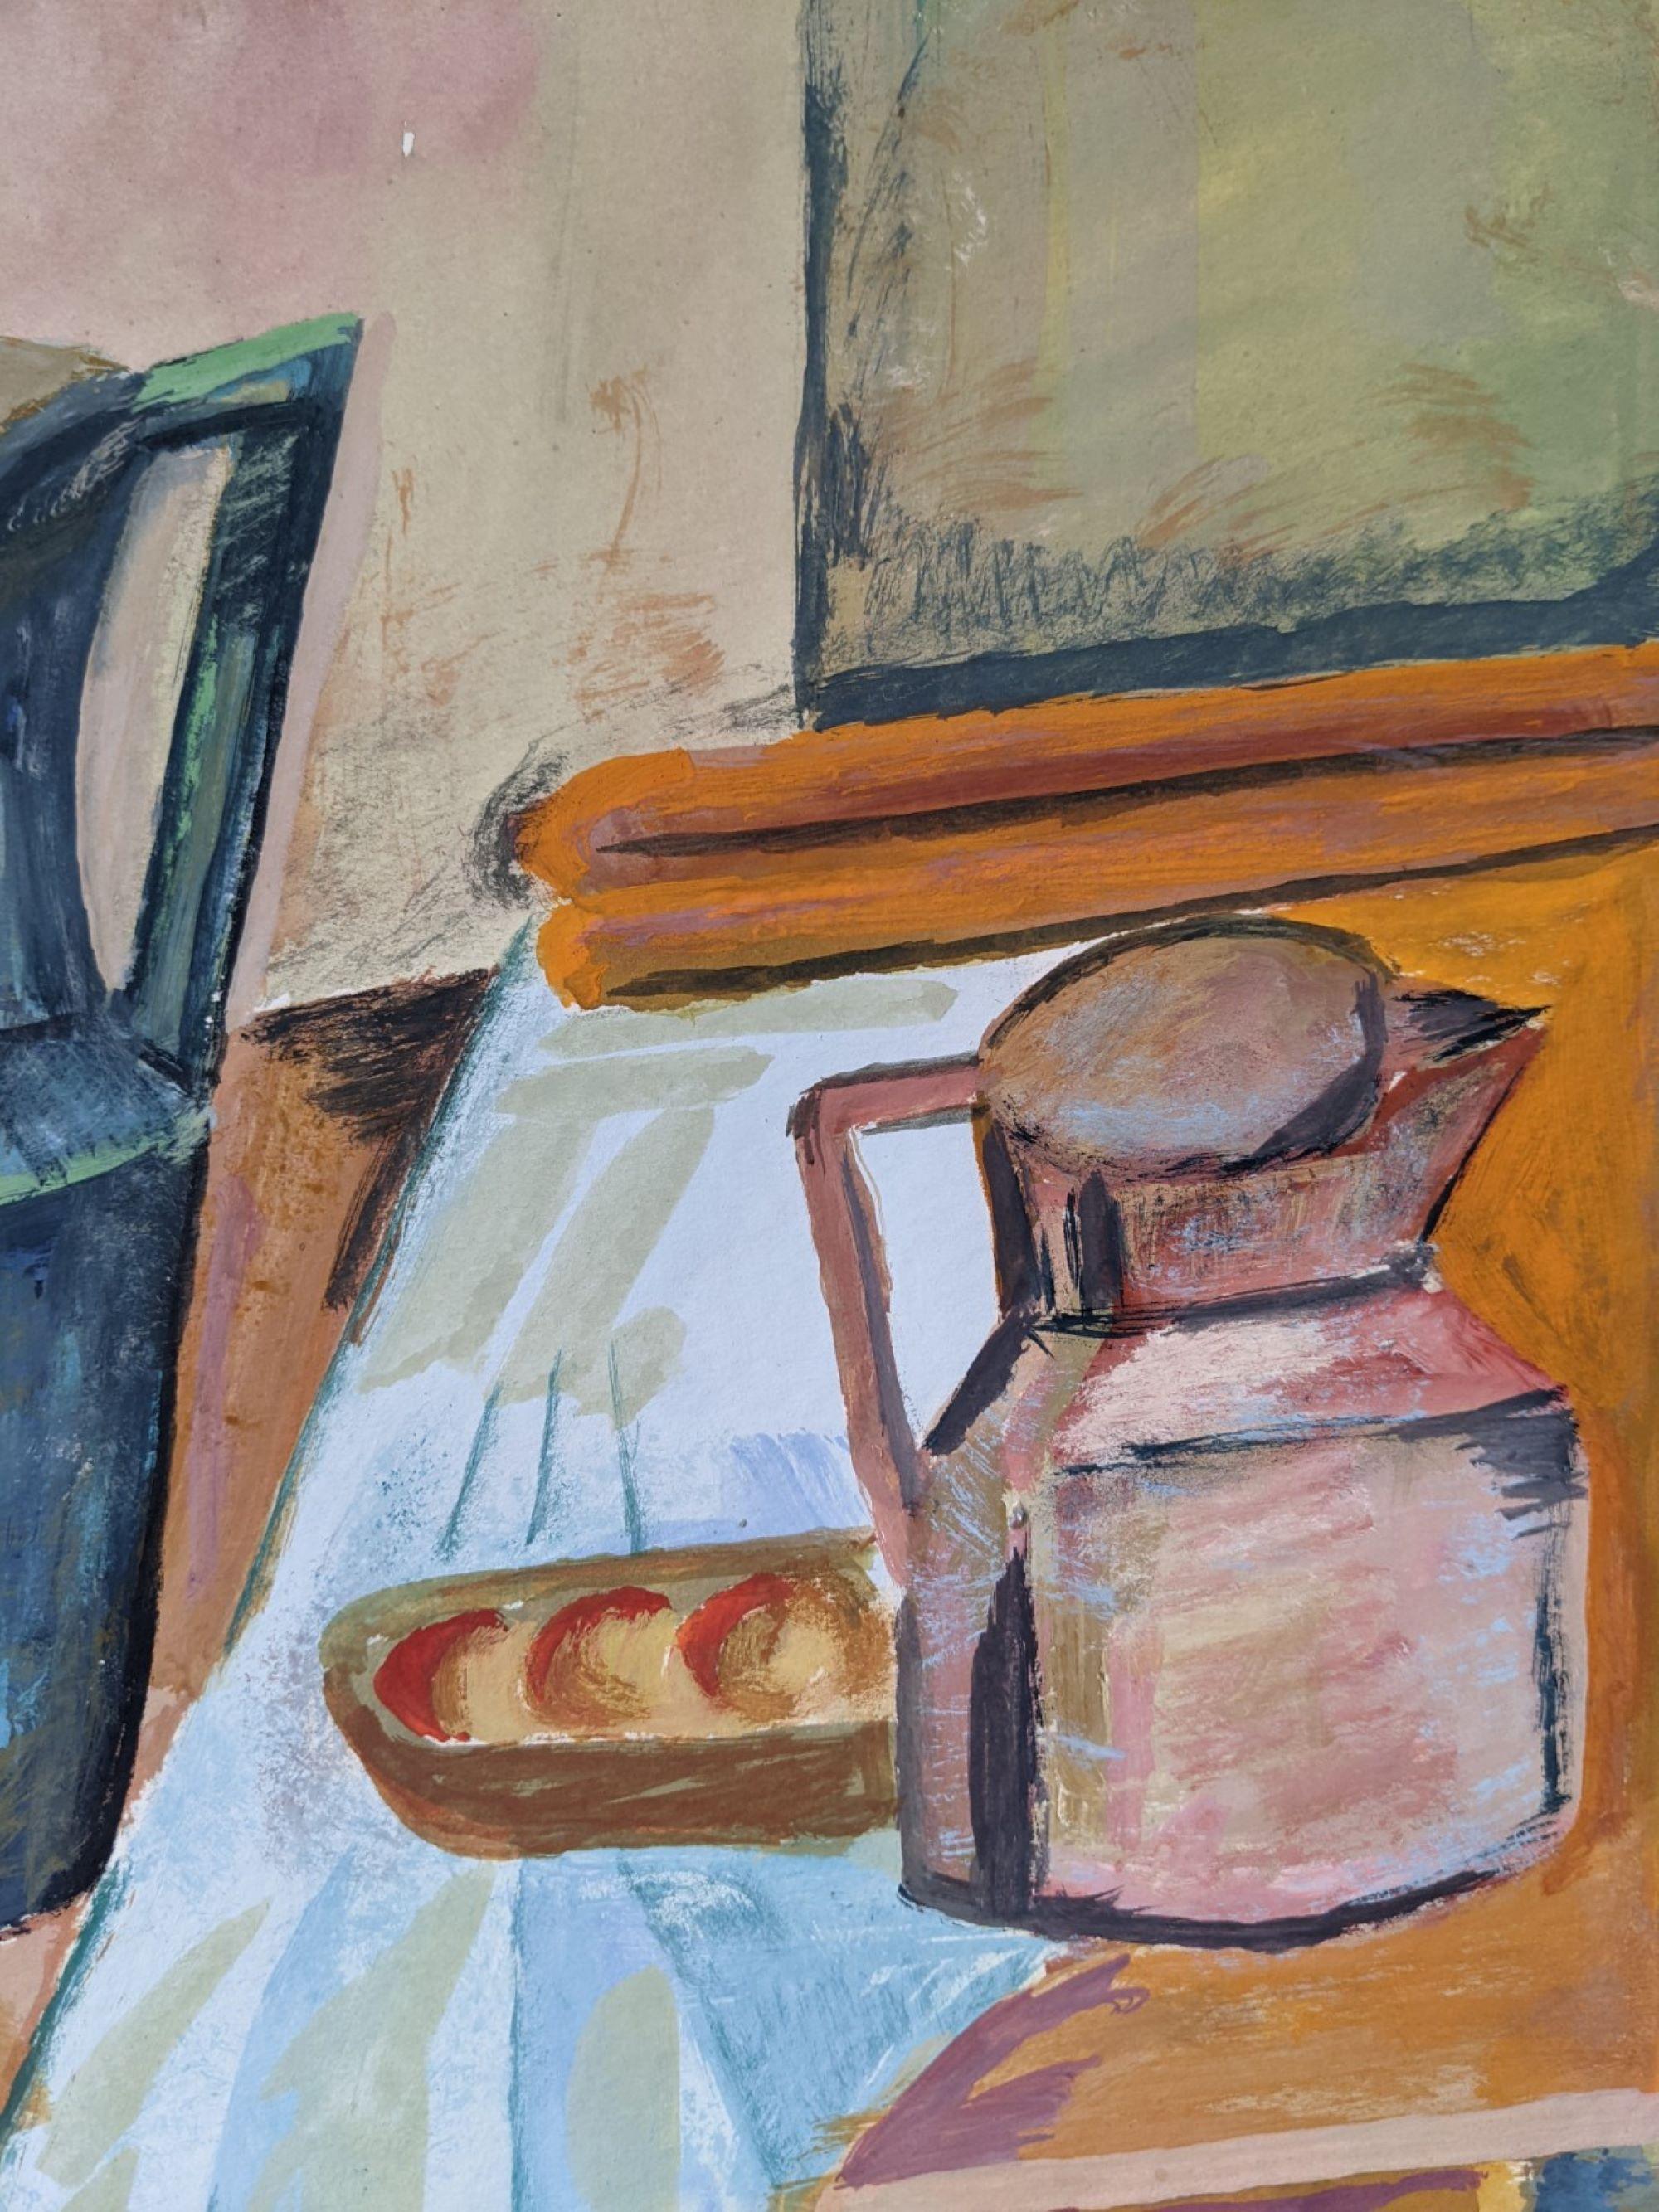 TABLETOP SETTING
Size: 51 x 43cm (including frame)
Watercolour and gouache on paper

A lively and expressive mid-century still life composition, executed in watercolour and gouache onto paper.

The painting depicts an interior setting featuring an